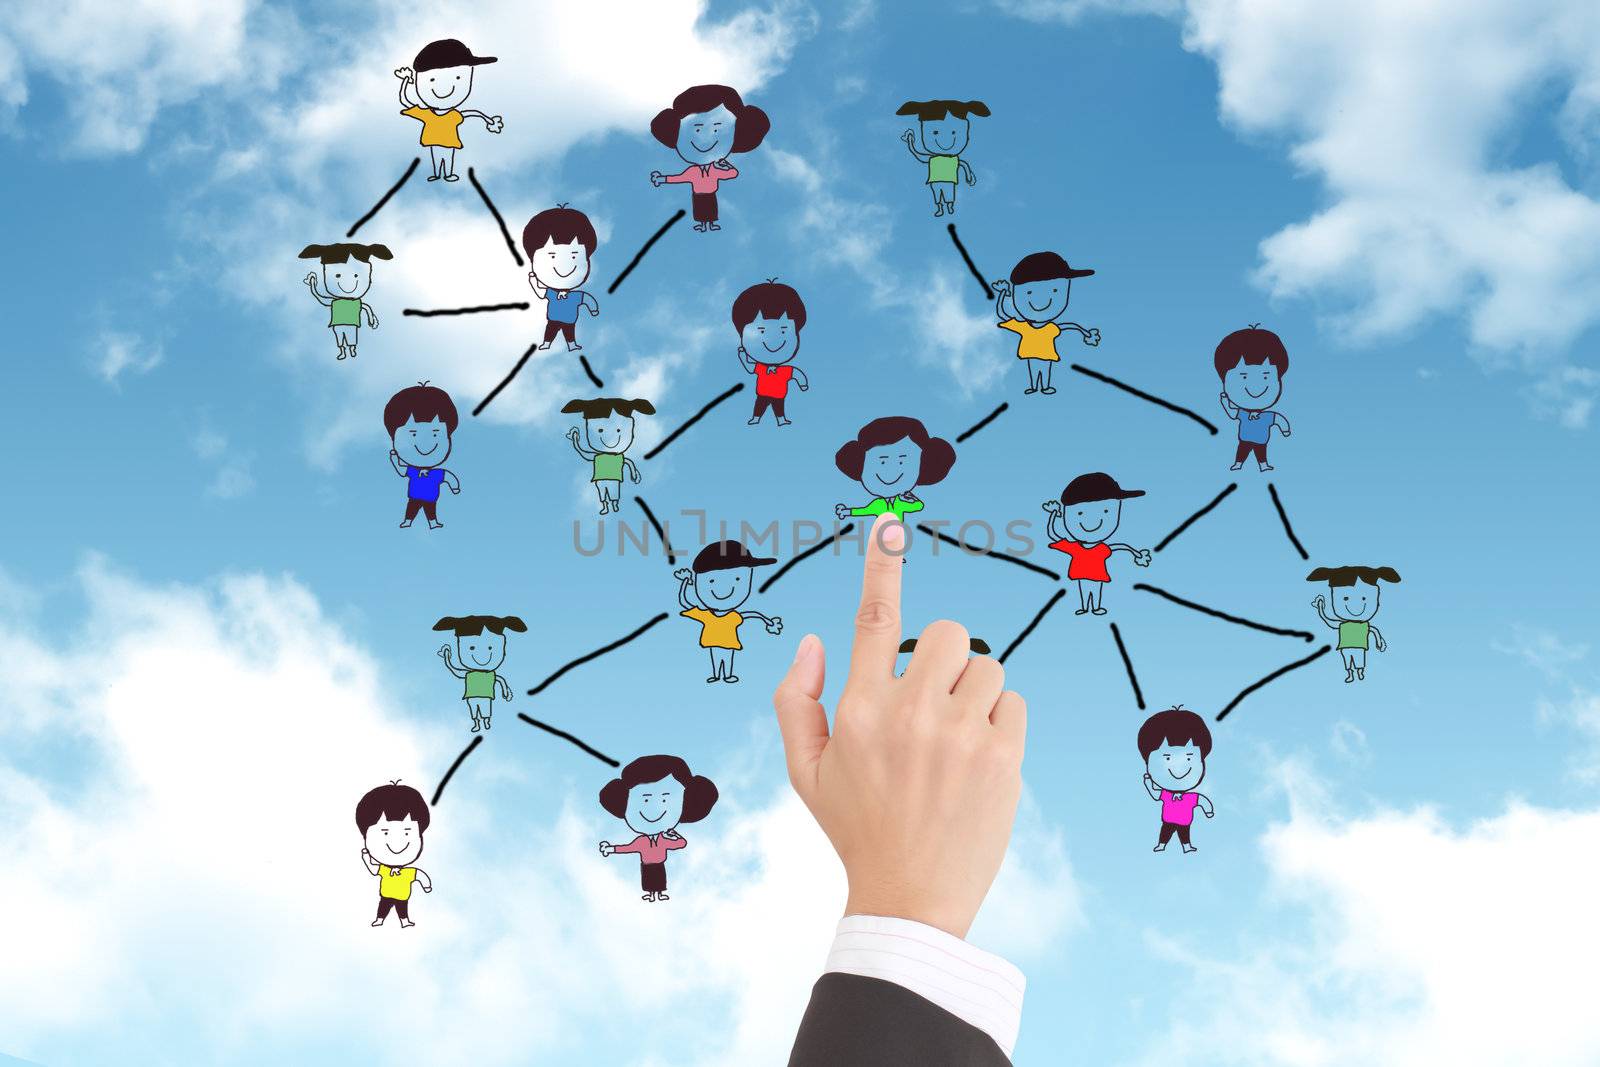 social network structure